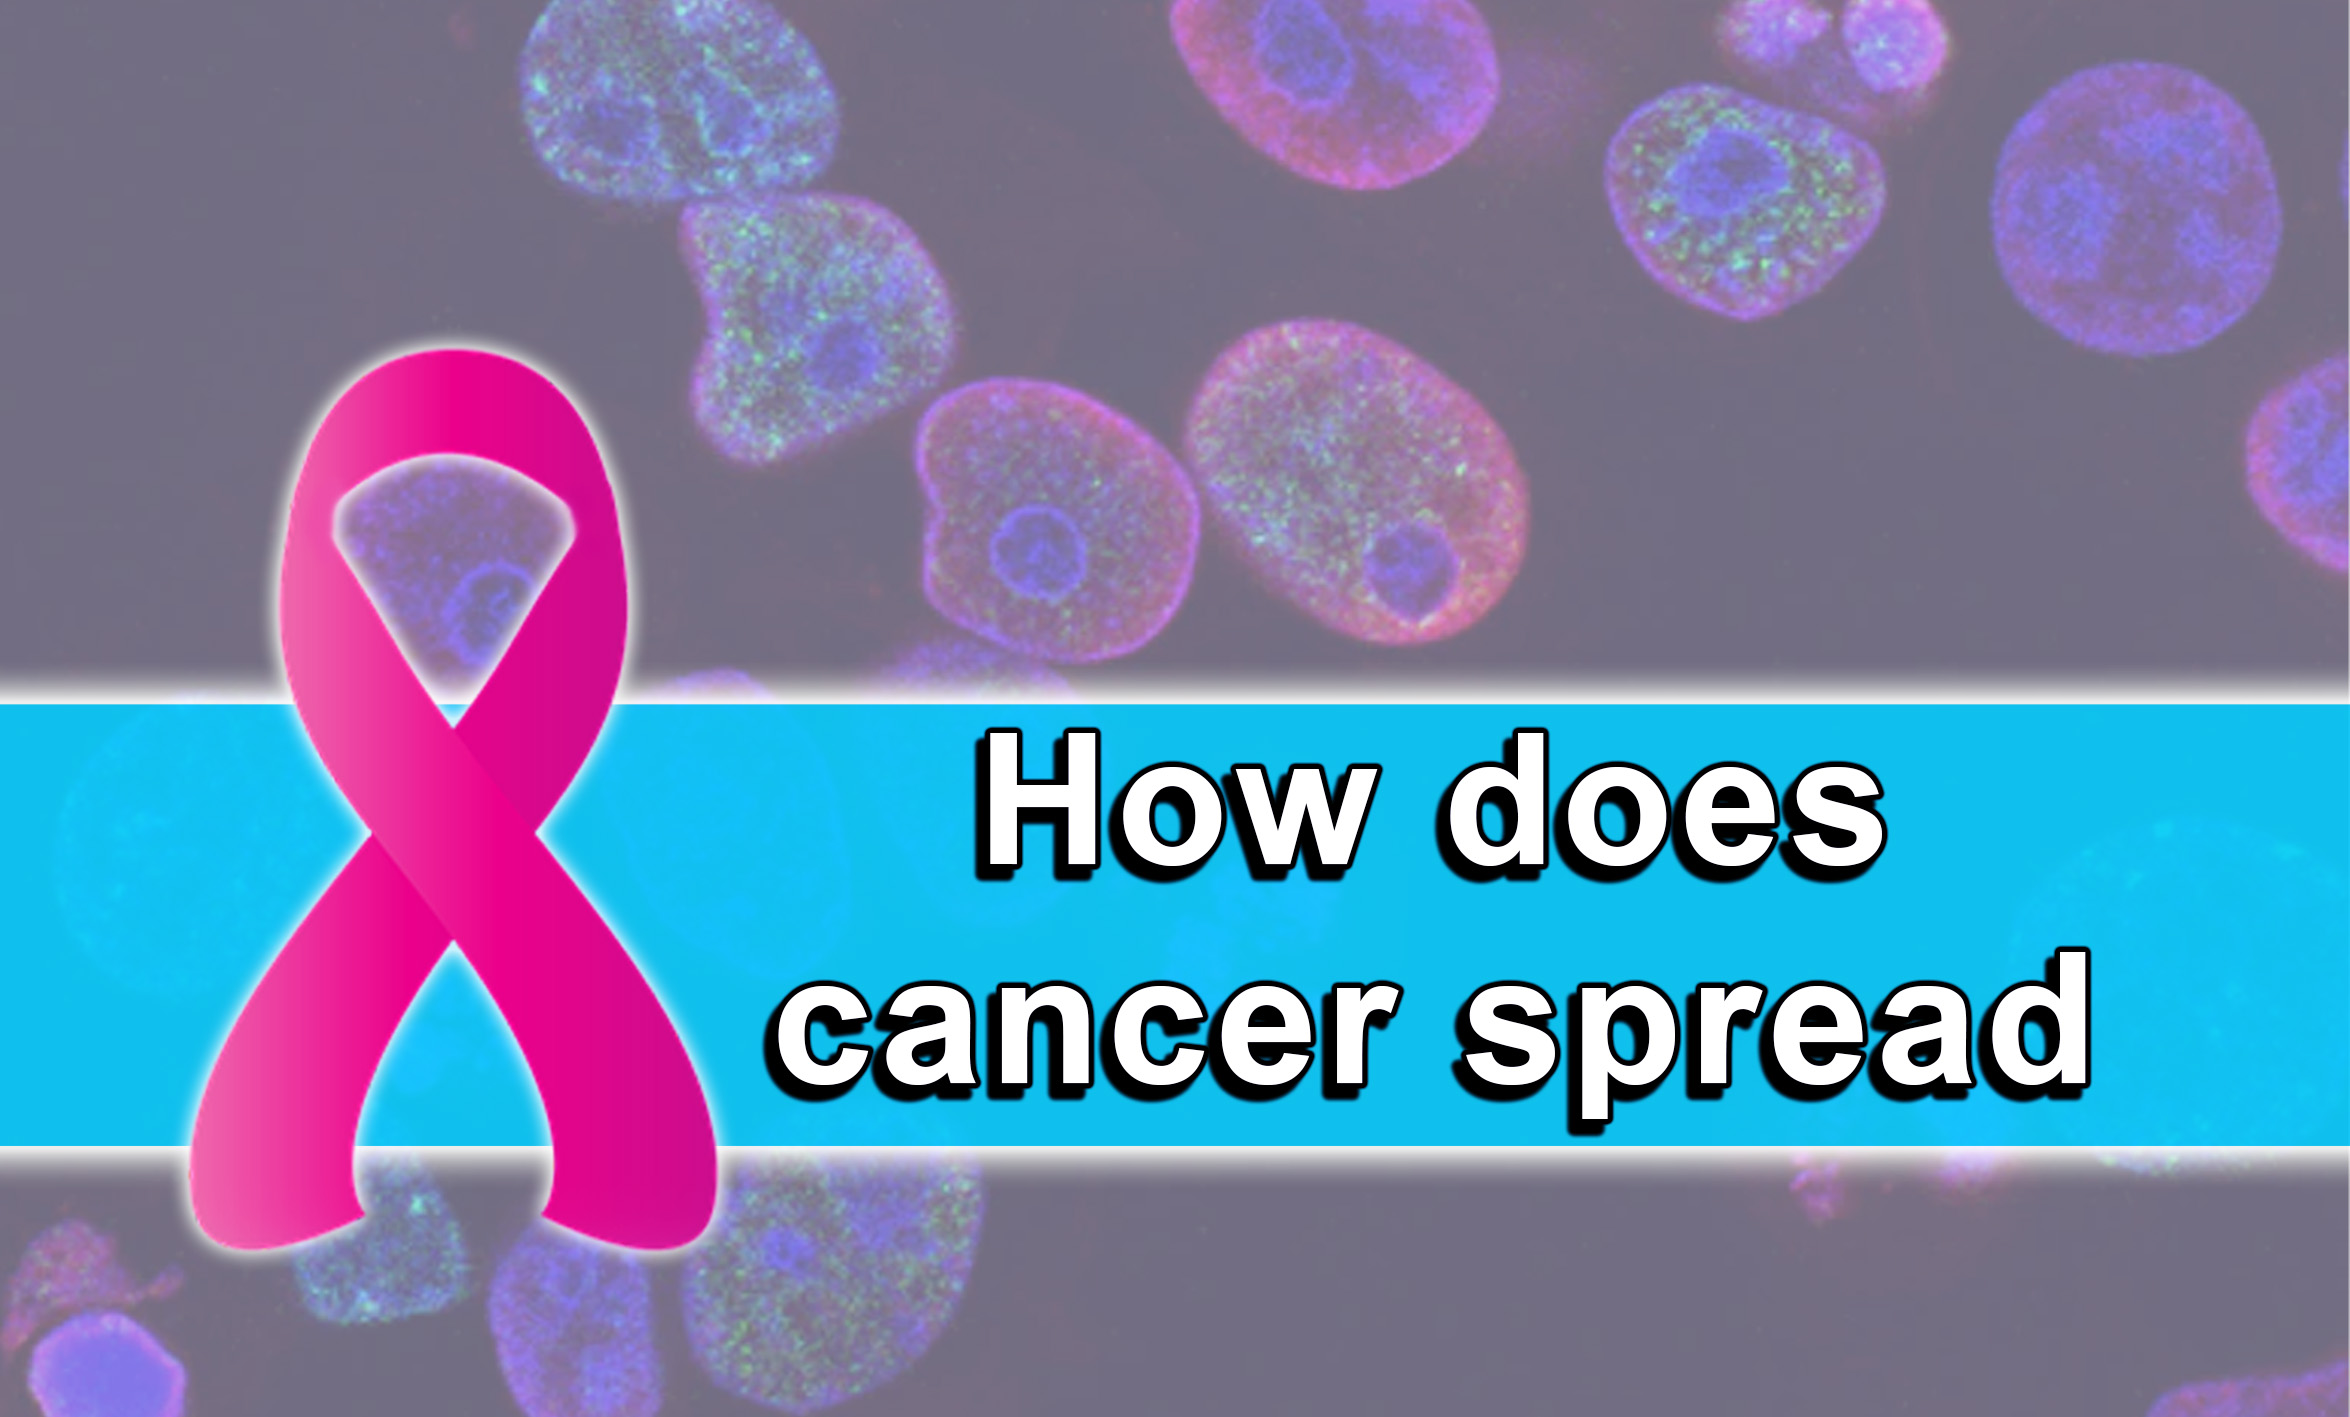 How does cancer spread